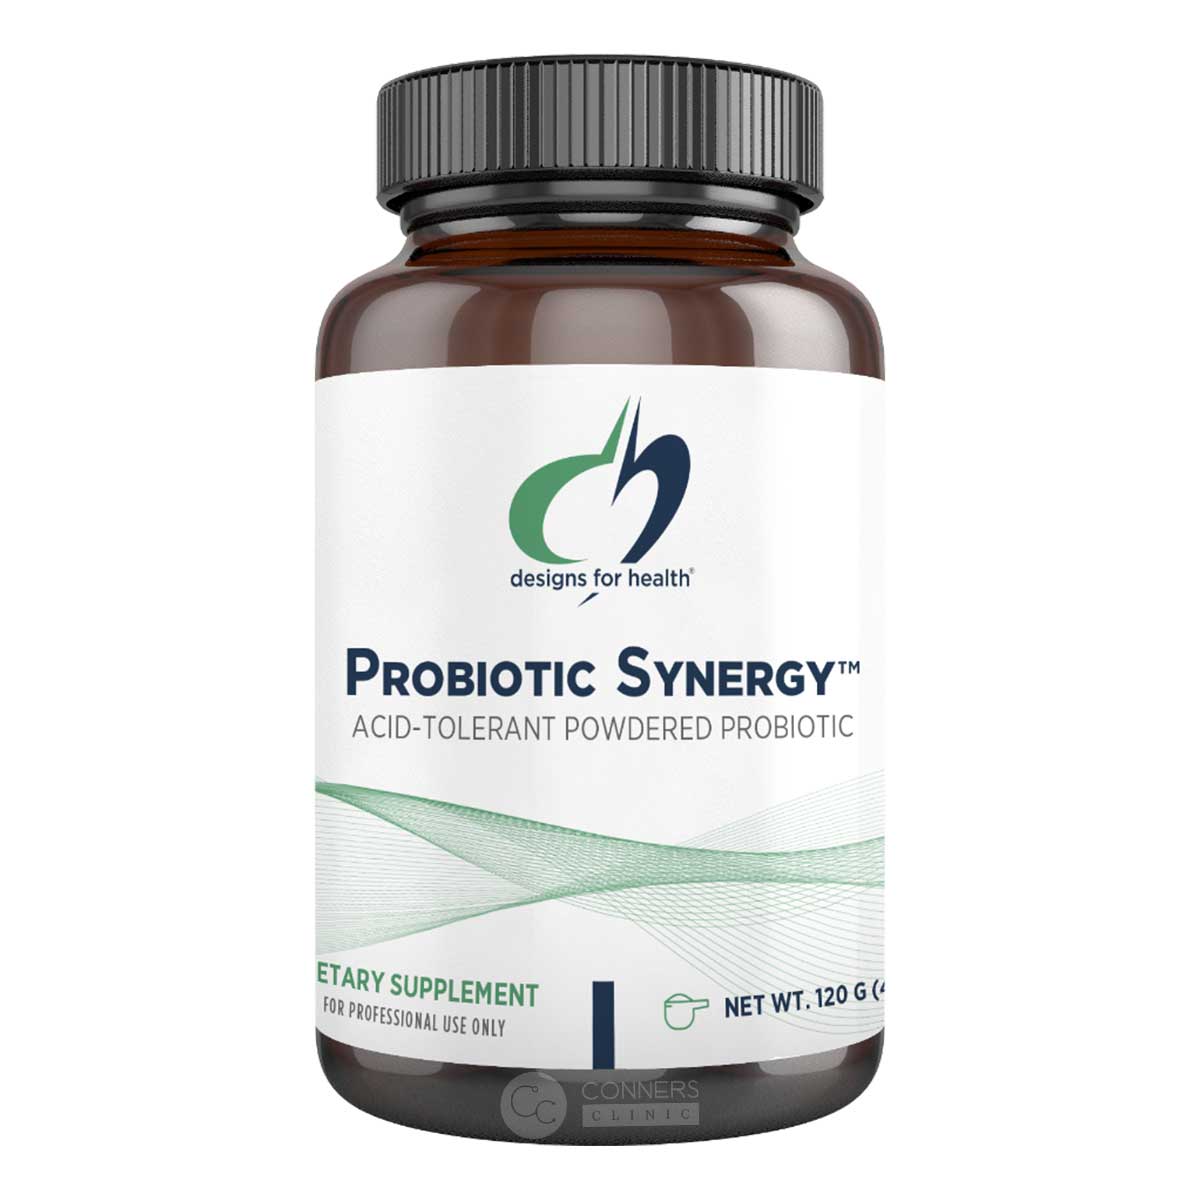 Probiotic Synergy Powder - 120g Designs for Health Supplement - Conners Clinic